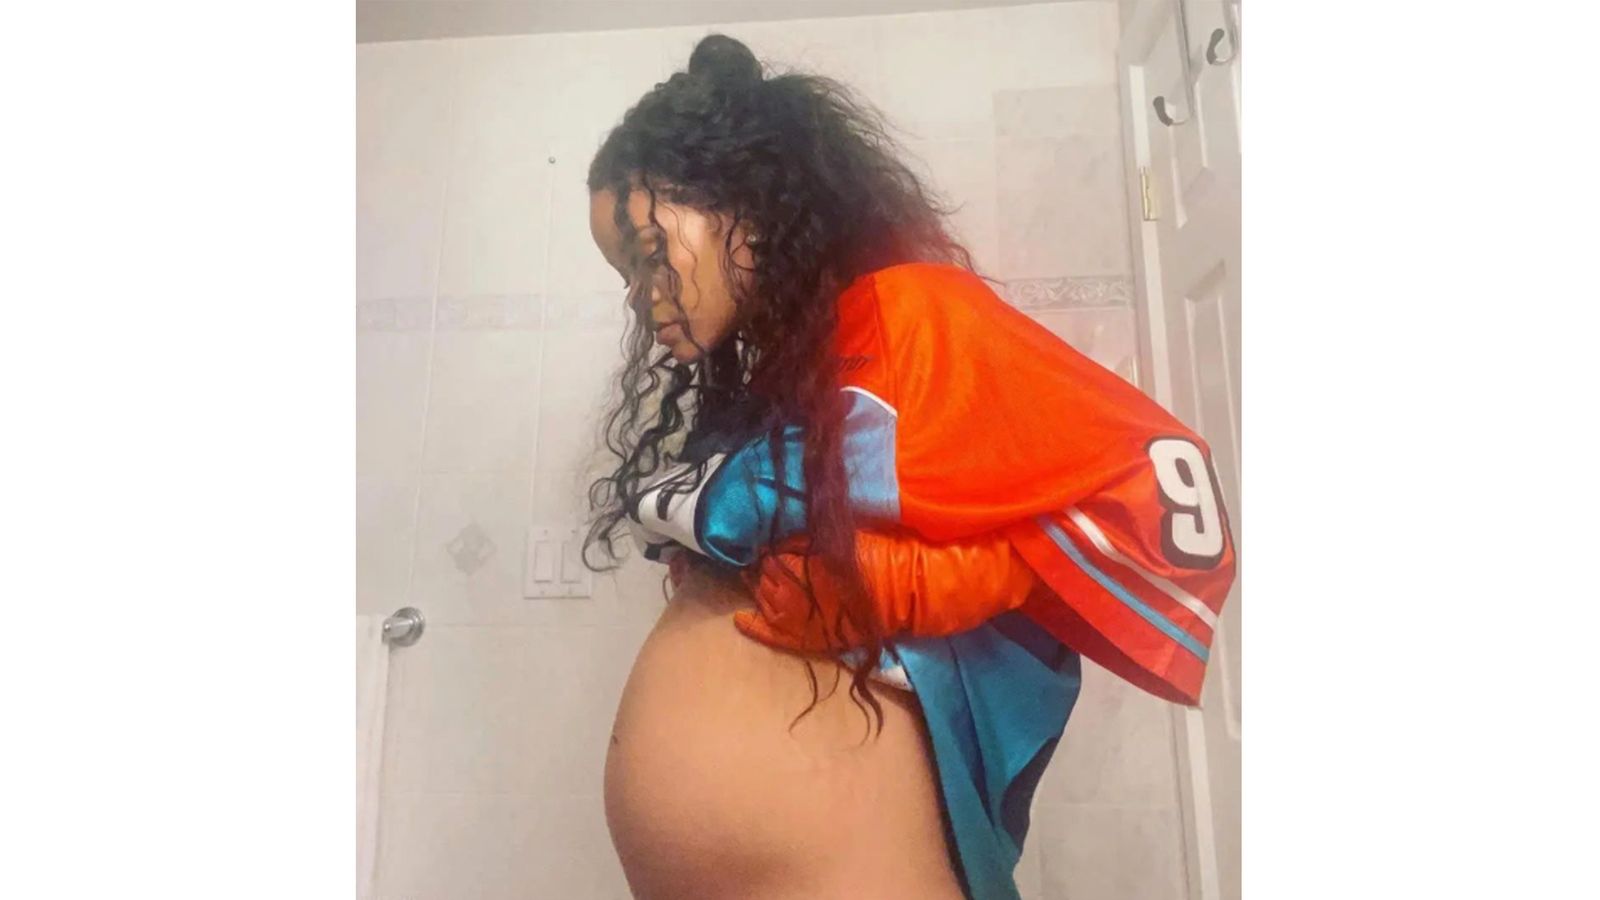 Rihanna shares baby bump photo on Instagram after announcing pregnancy